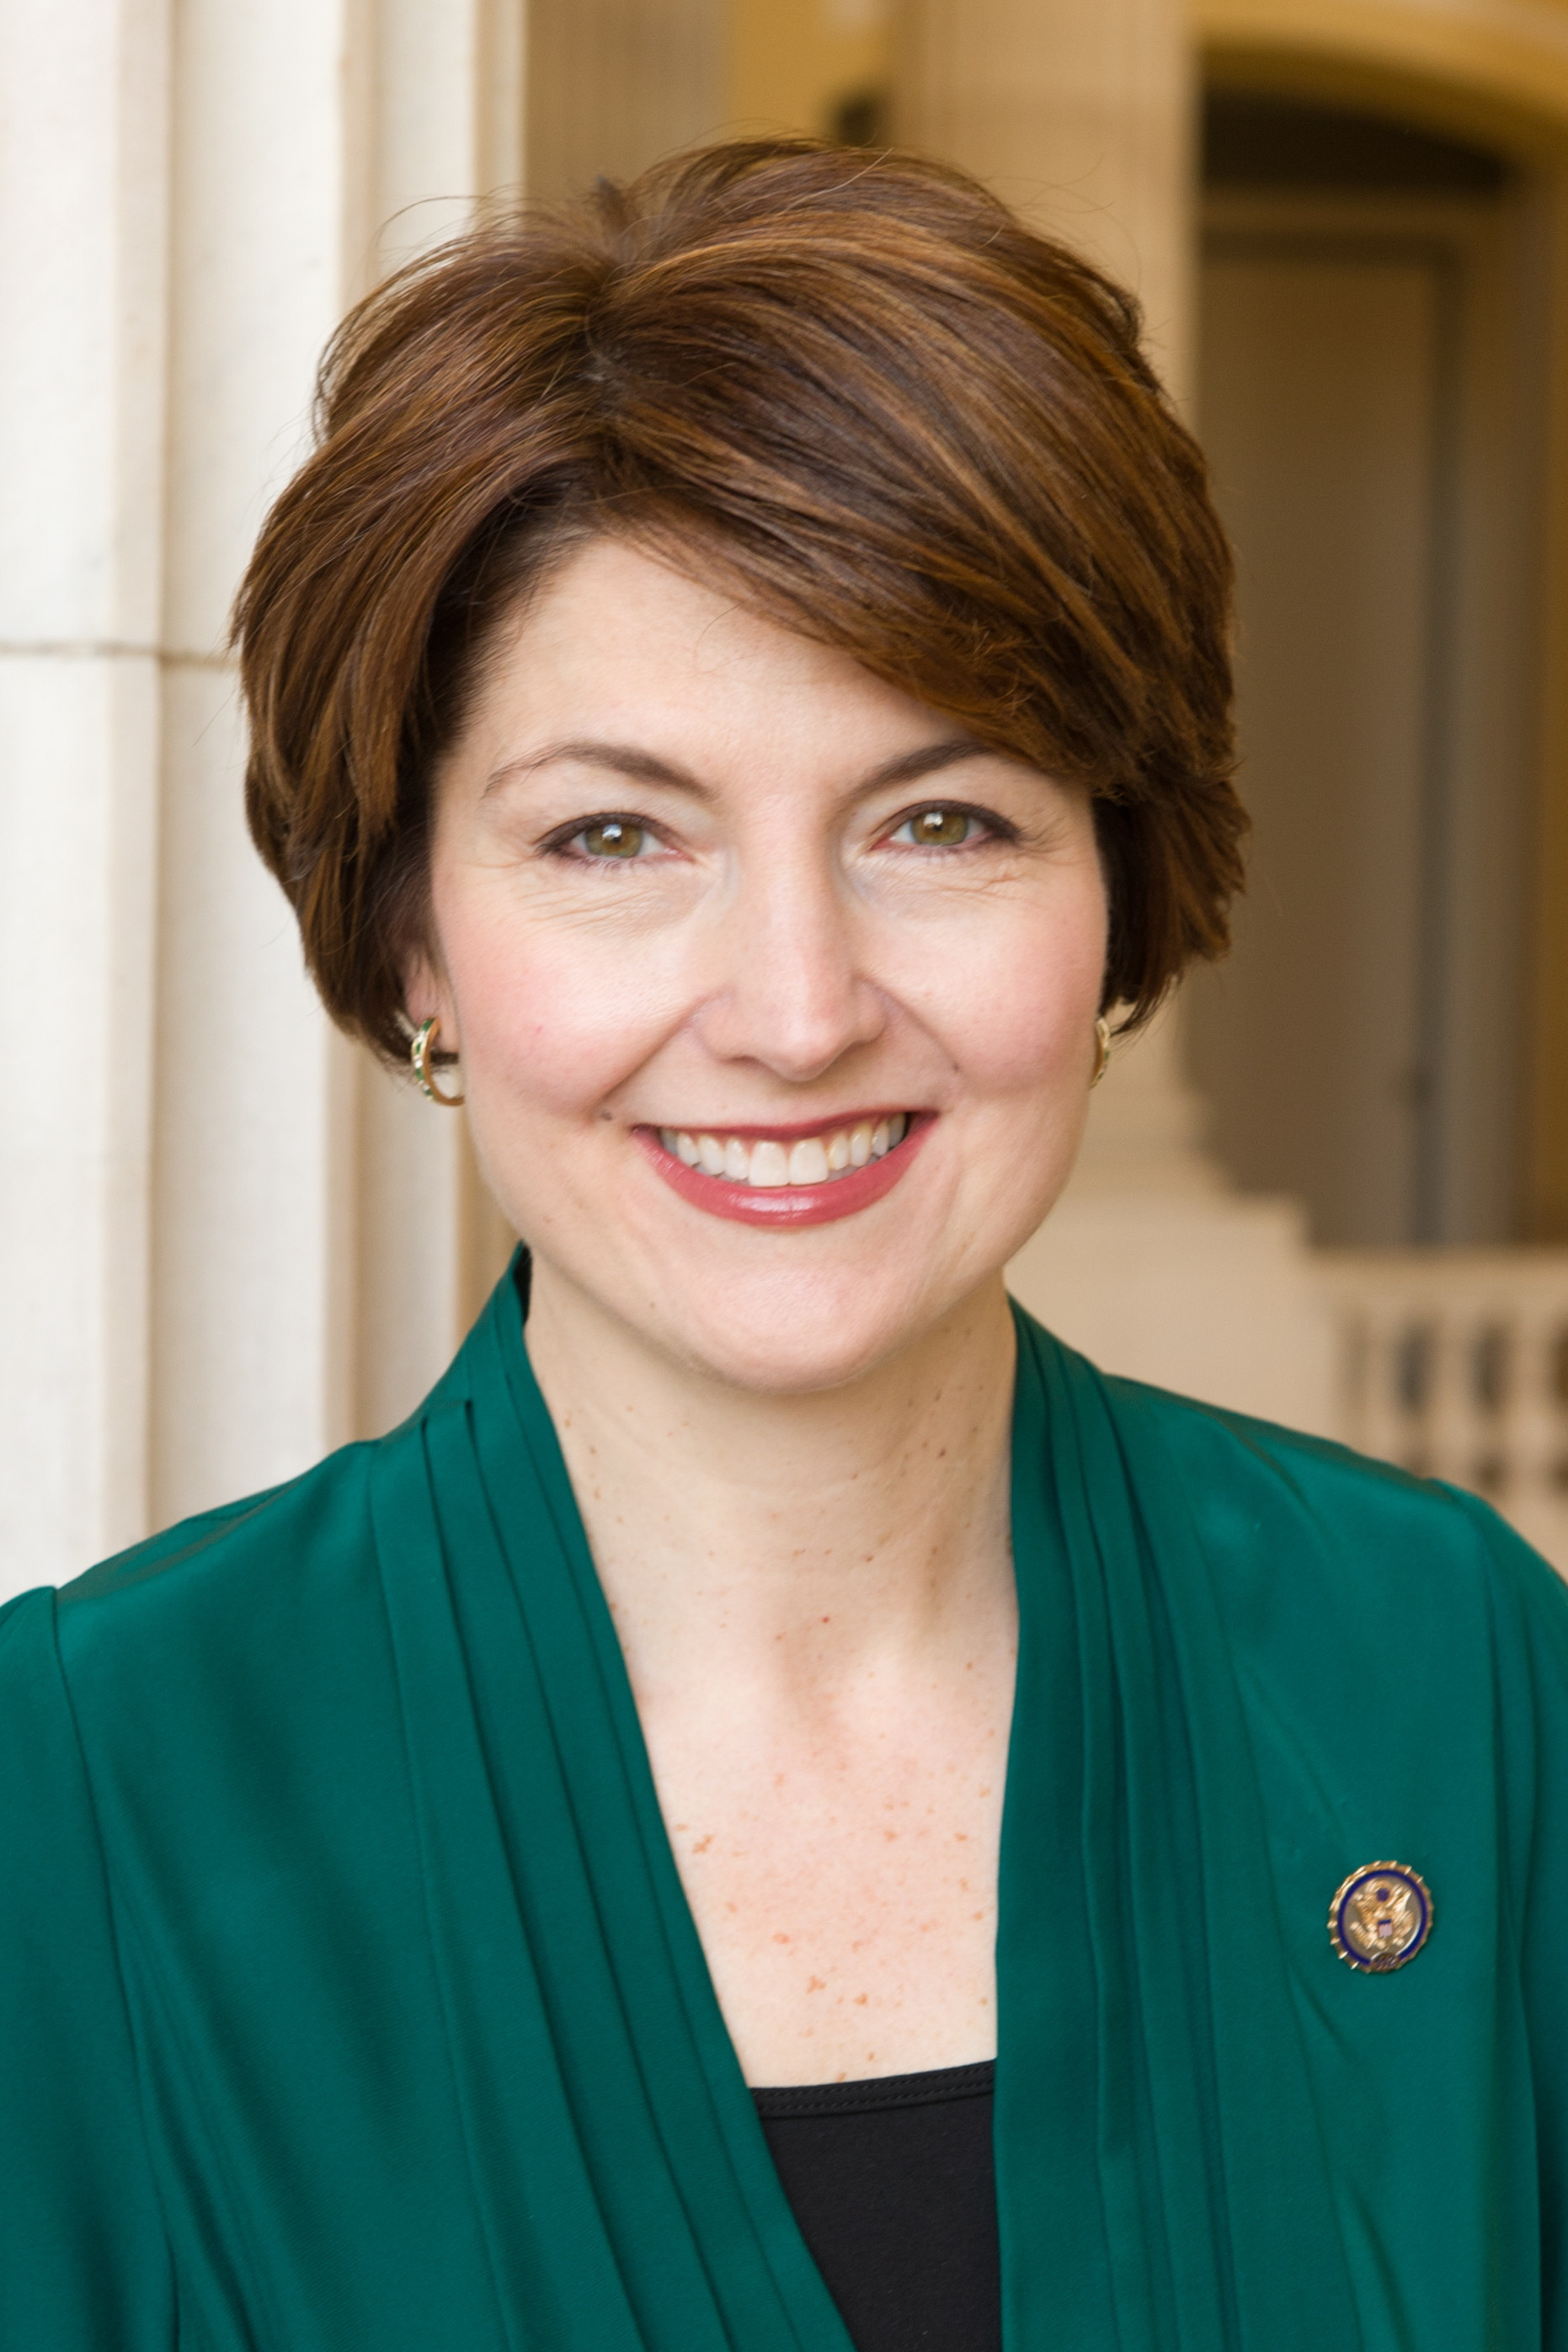 Cathy McMorris Rodgers, Who Gave Tonight’s State of the Union Rebuttal, Attended a Fundamentalist Christian College